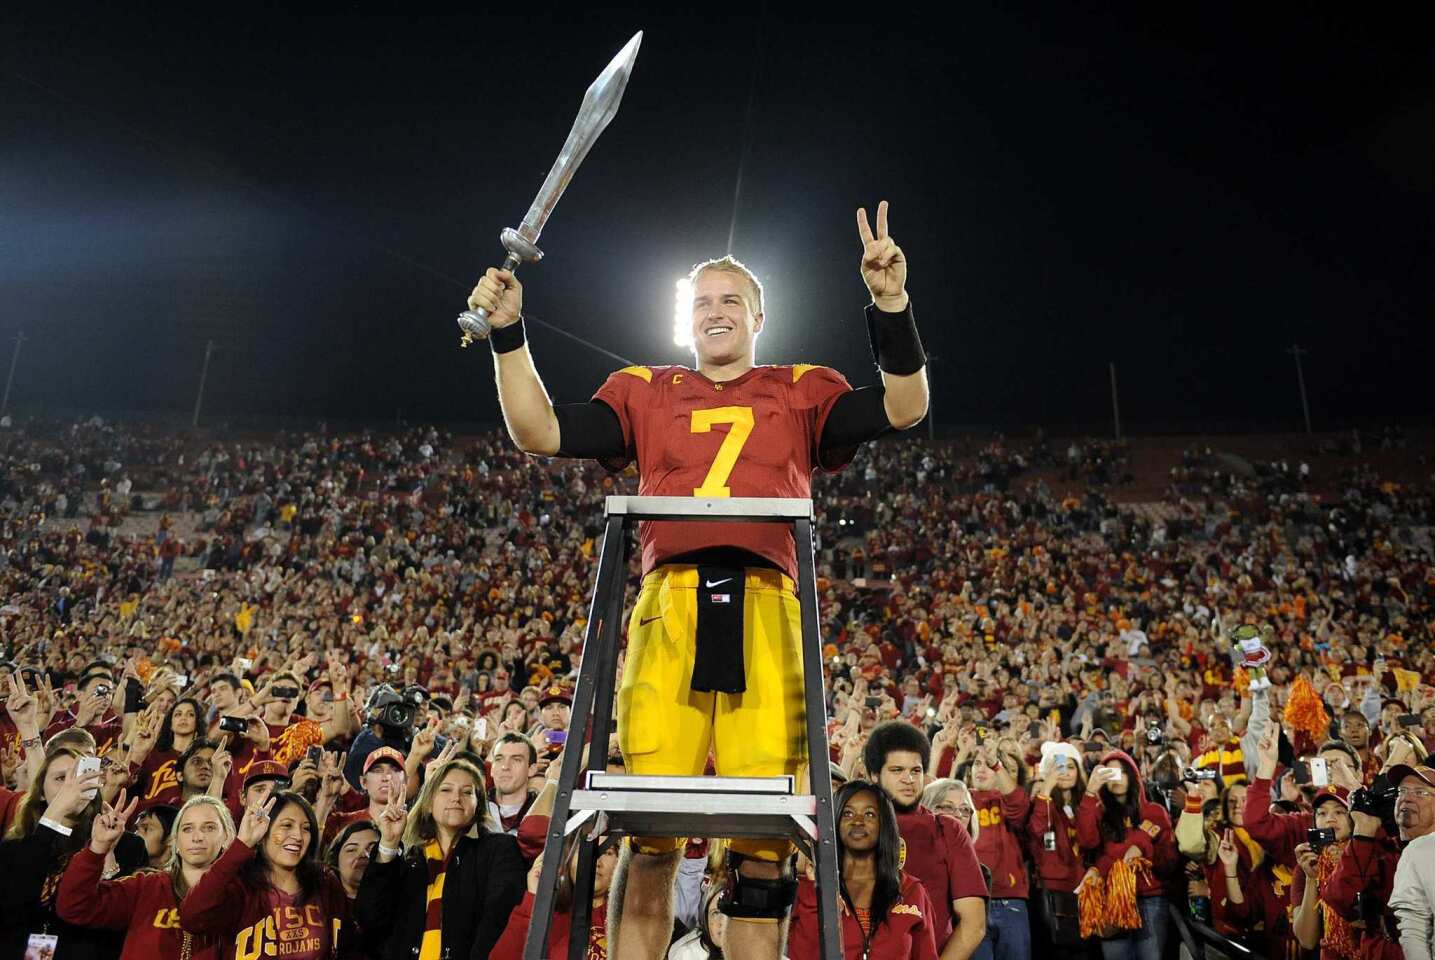 Trojans quarterback Matt Barkley leads the band after defeating UCLA, 50-0, on Saturday night at the Coliseum.